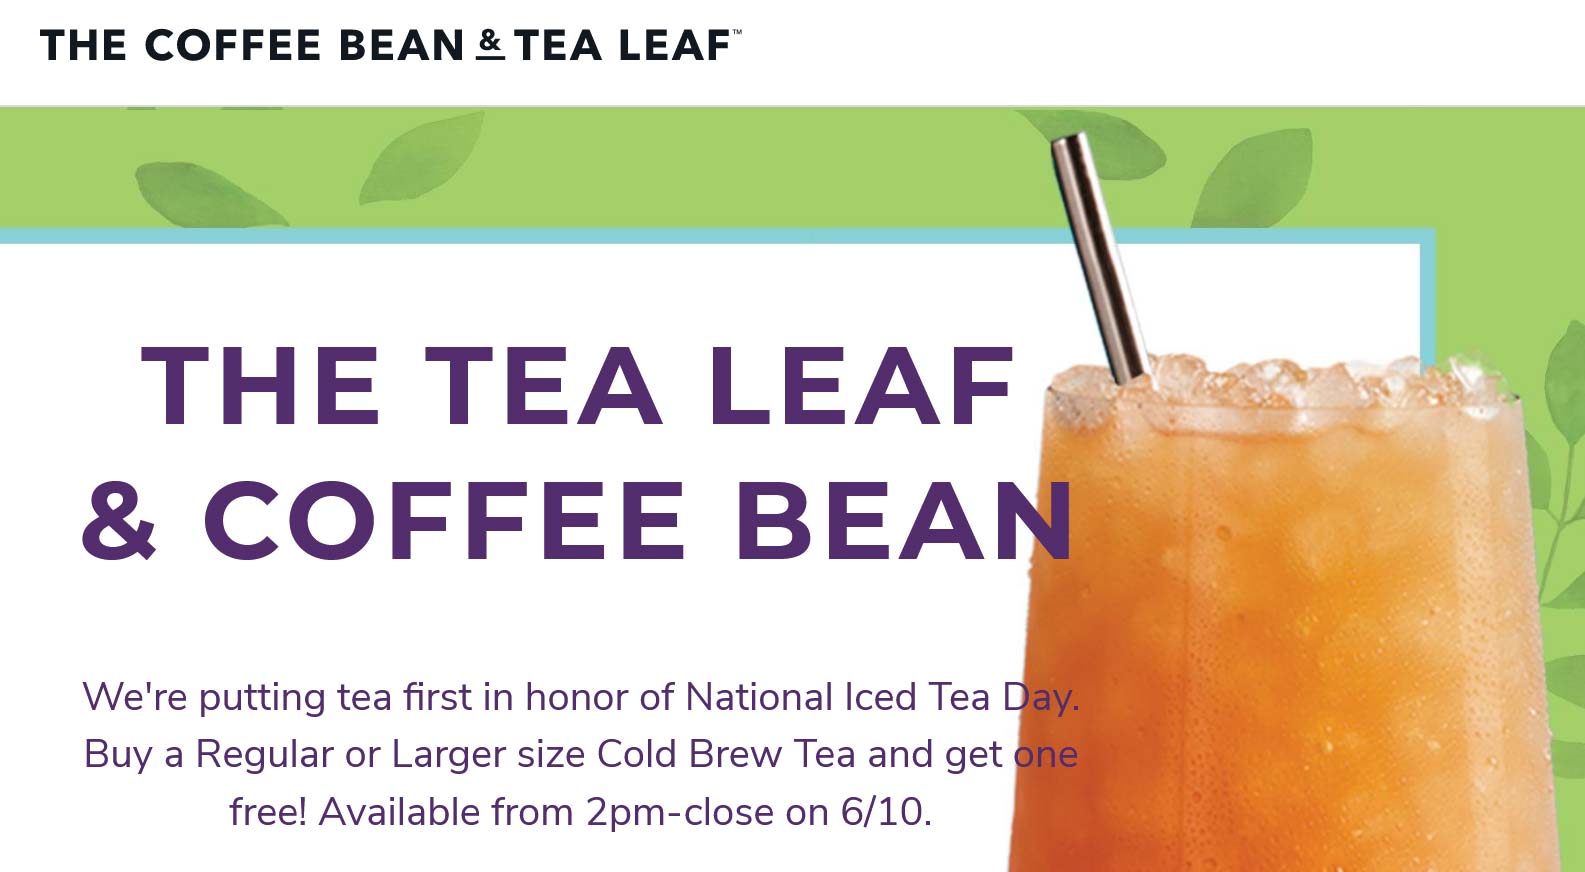 The Coffee Bean & Tea Leaf restaurants Coupon  Second cold brew tea free today at The Coffee Bean & Tea Leaf #thecoffeebeantealeaf 